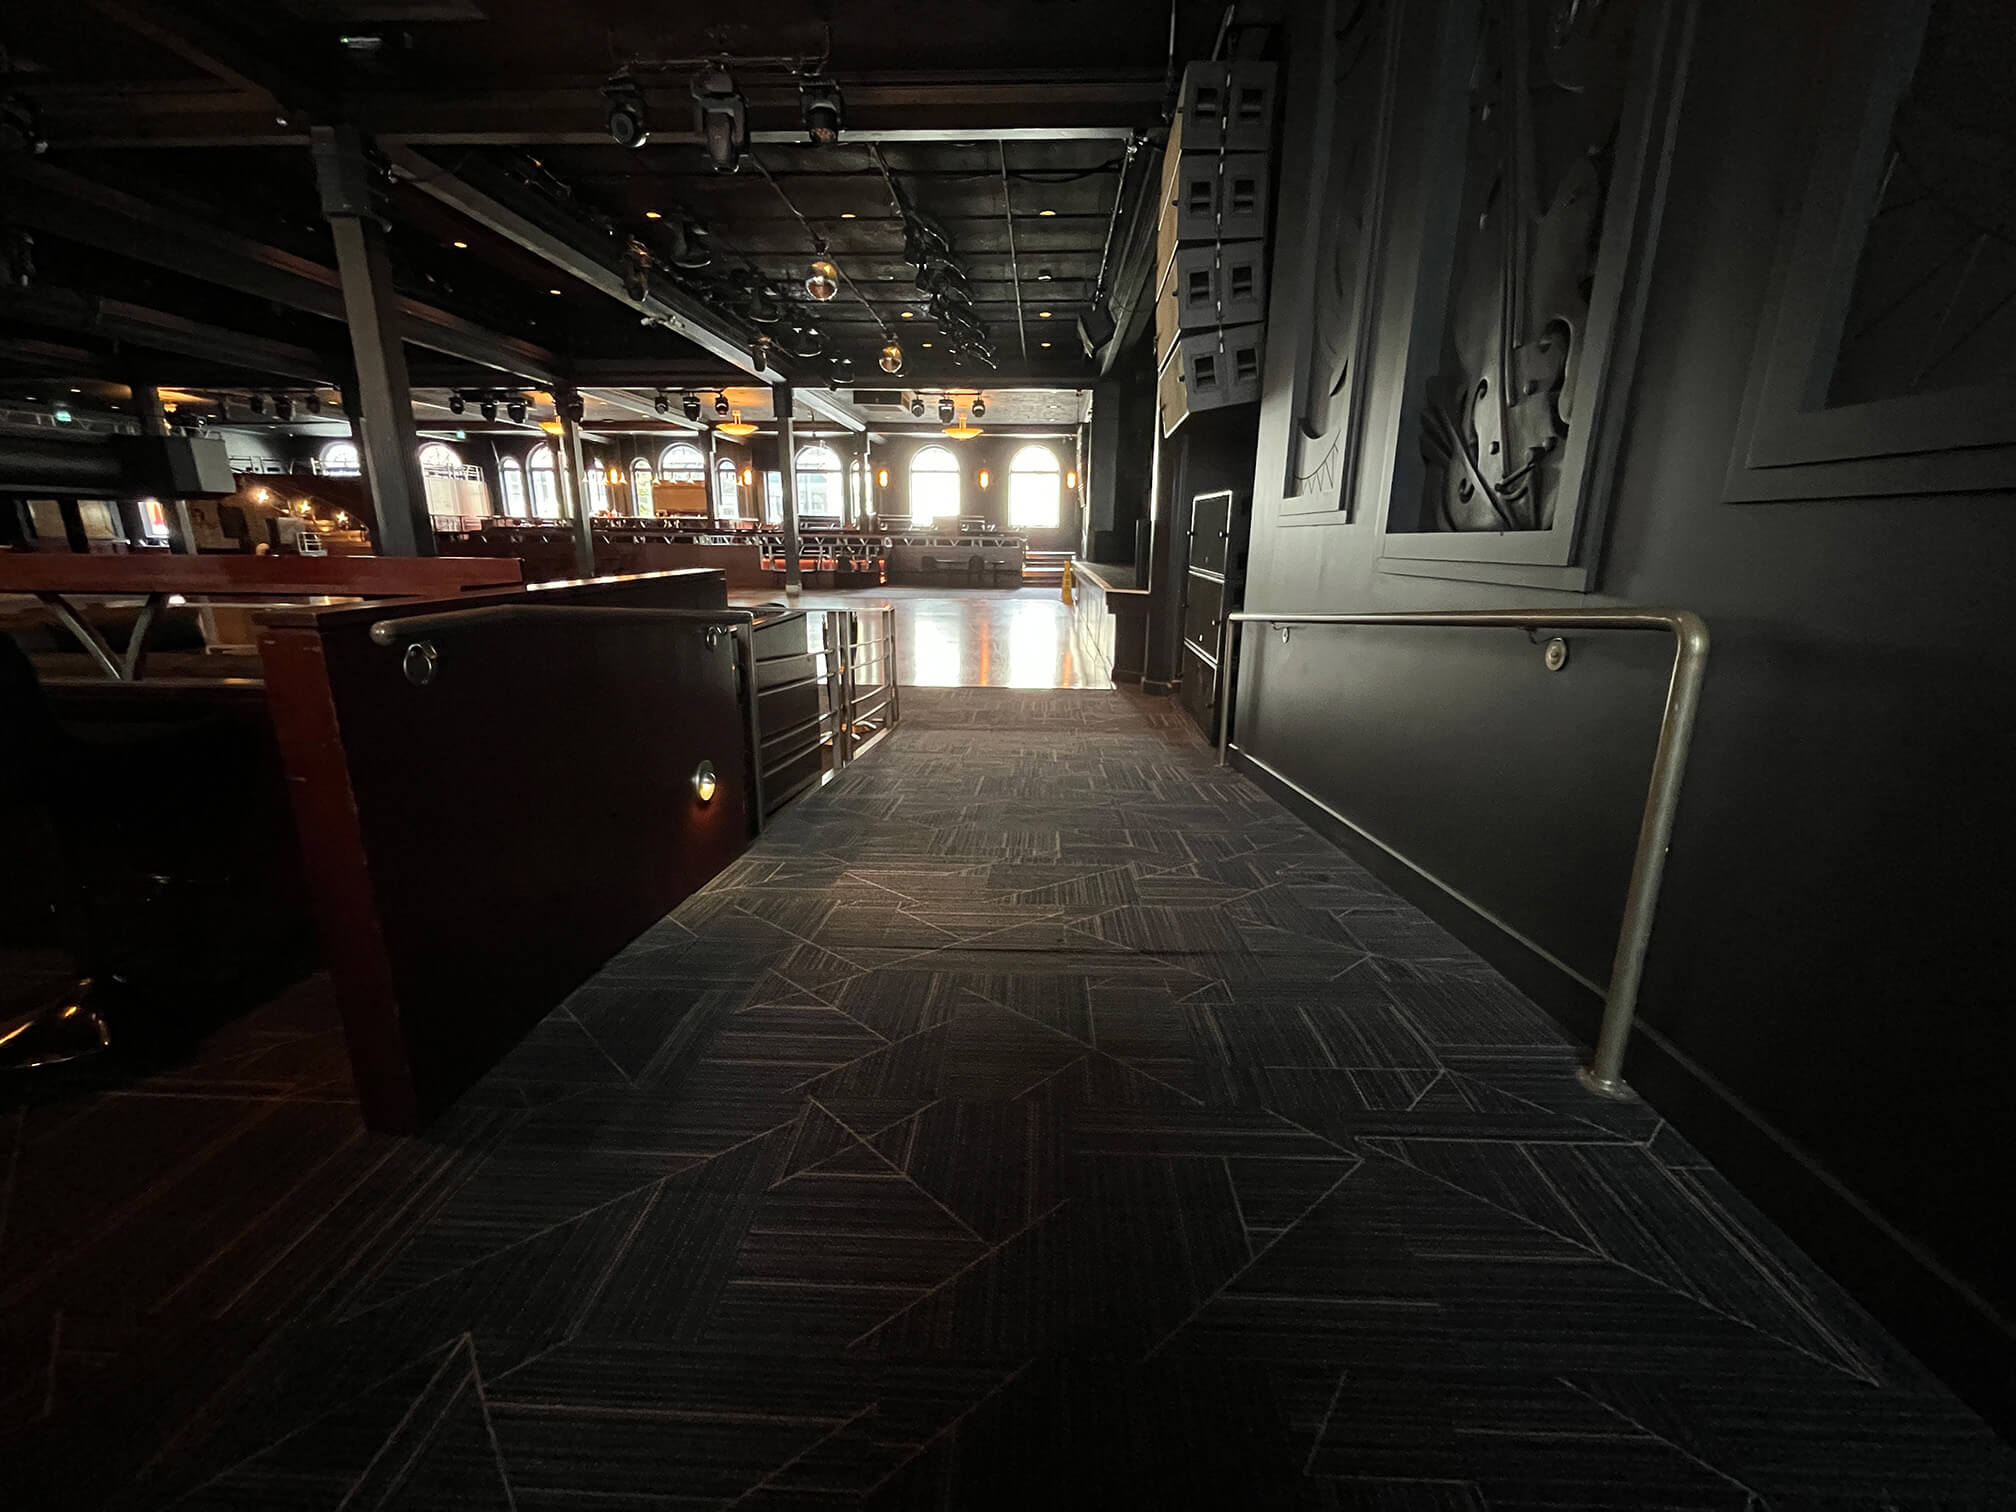 View of the access ramp at the Commodore Ballroom’s seating area, looking down-slope.